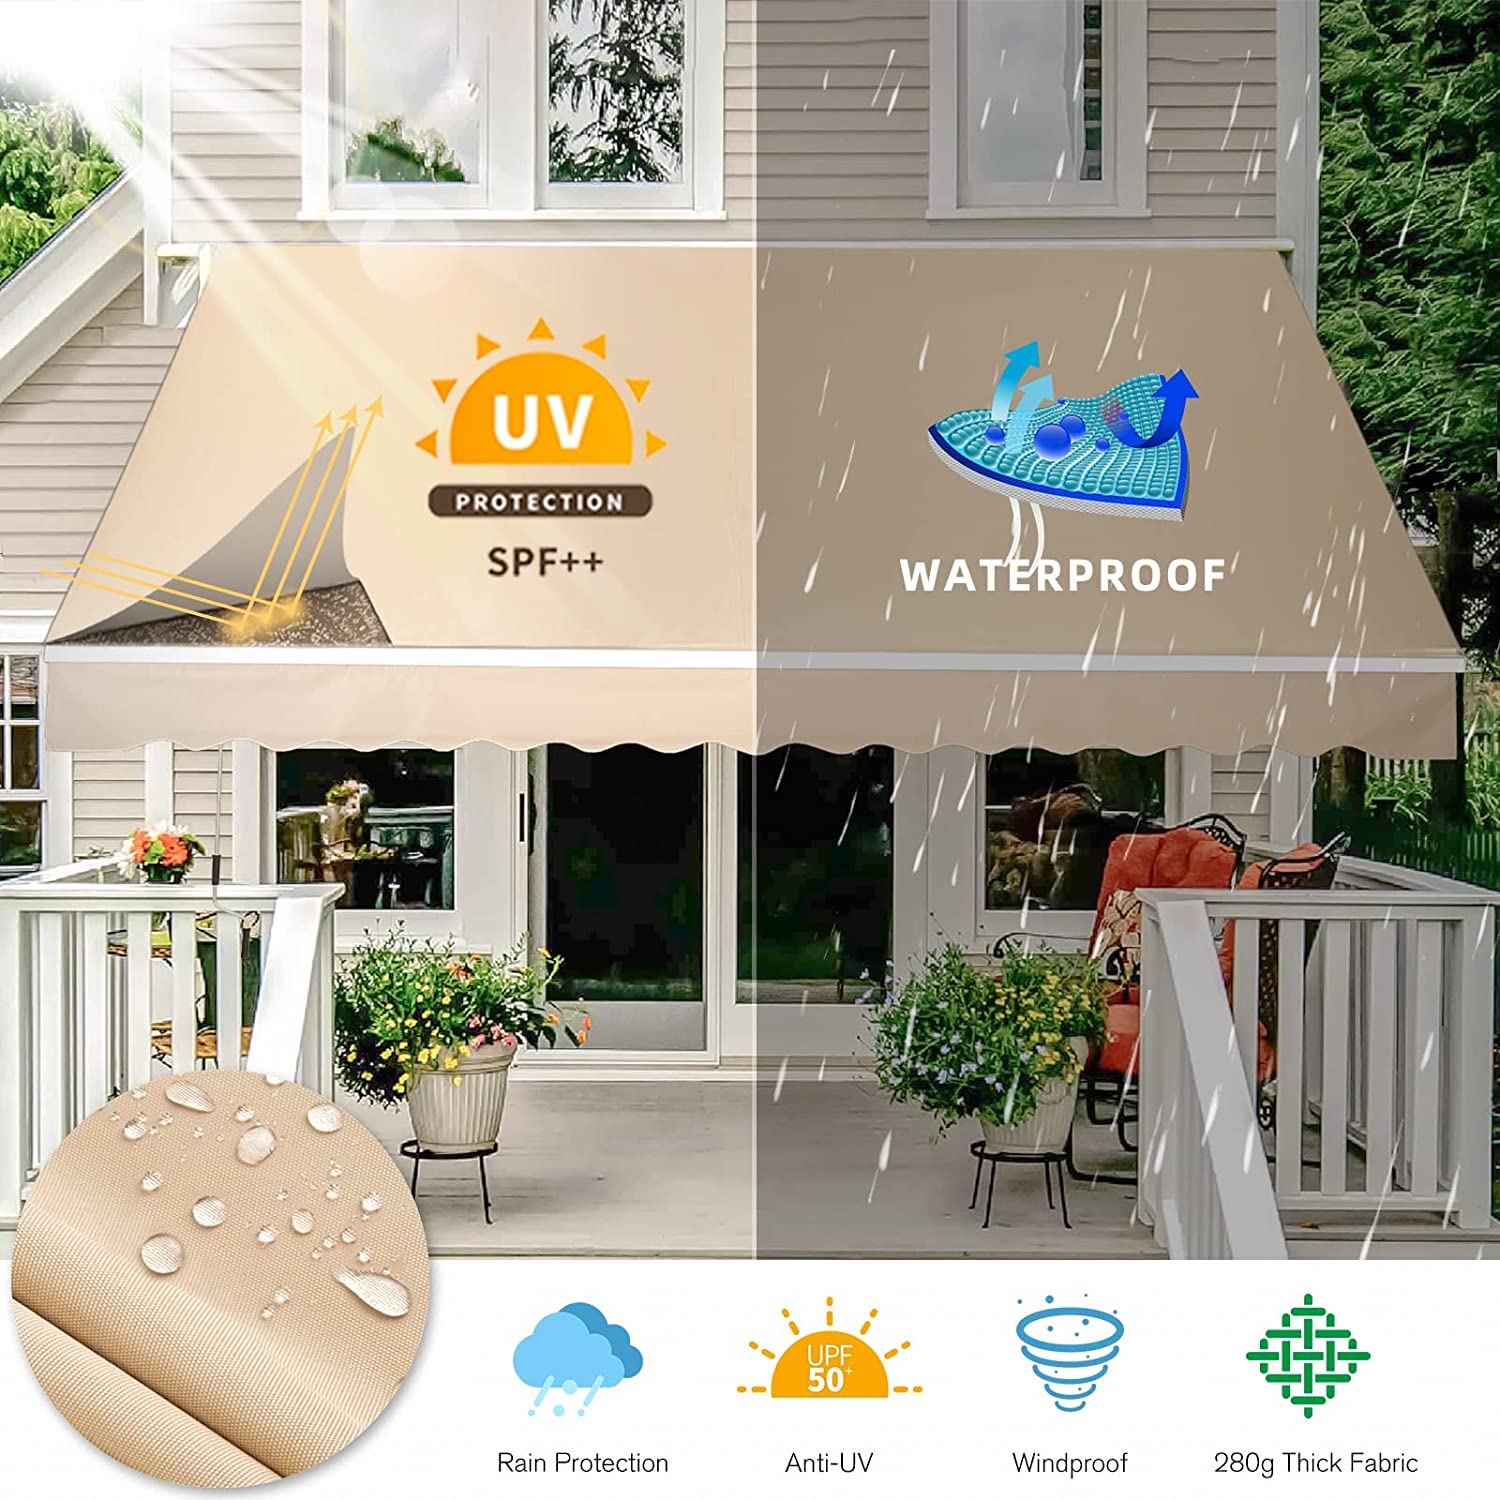 AECOJOY 8.2' x 6.5' Manual Retractable Patio Awning,Outdoor Awning Retractable Sunshade Shelter-Beige - image 5 of 6